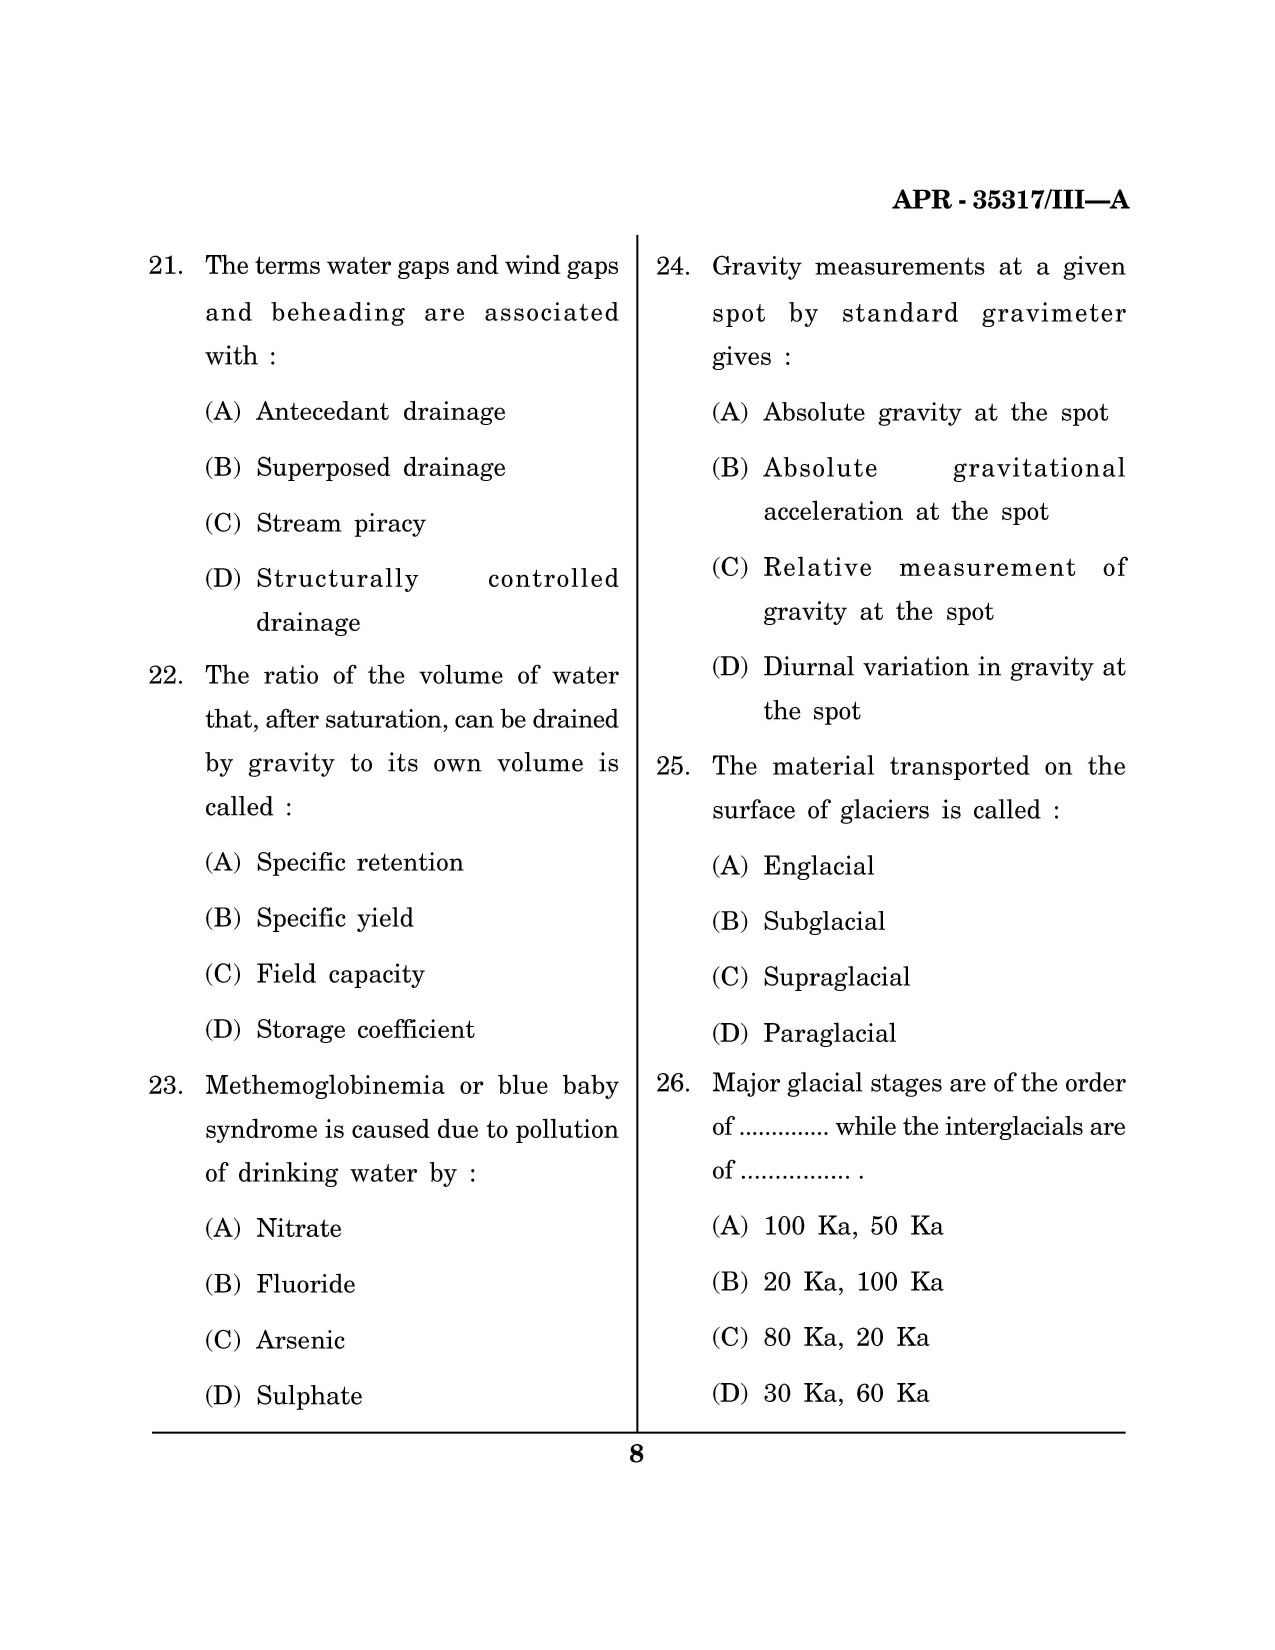 Maharashtra SET Earth Atmospheric Ocean Planetary Science Question Paper III April 2017 7